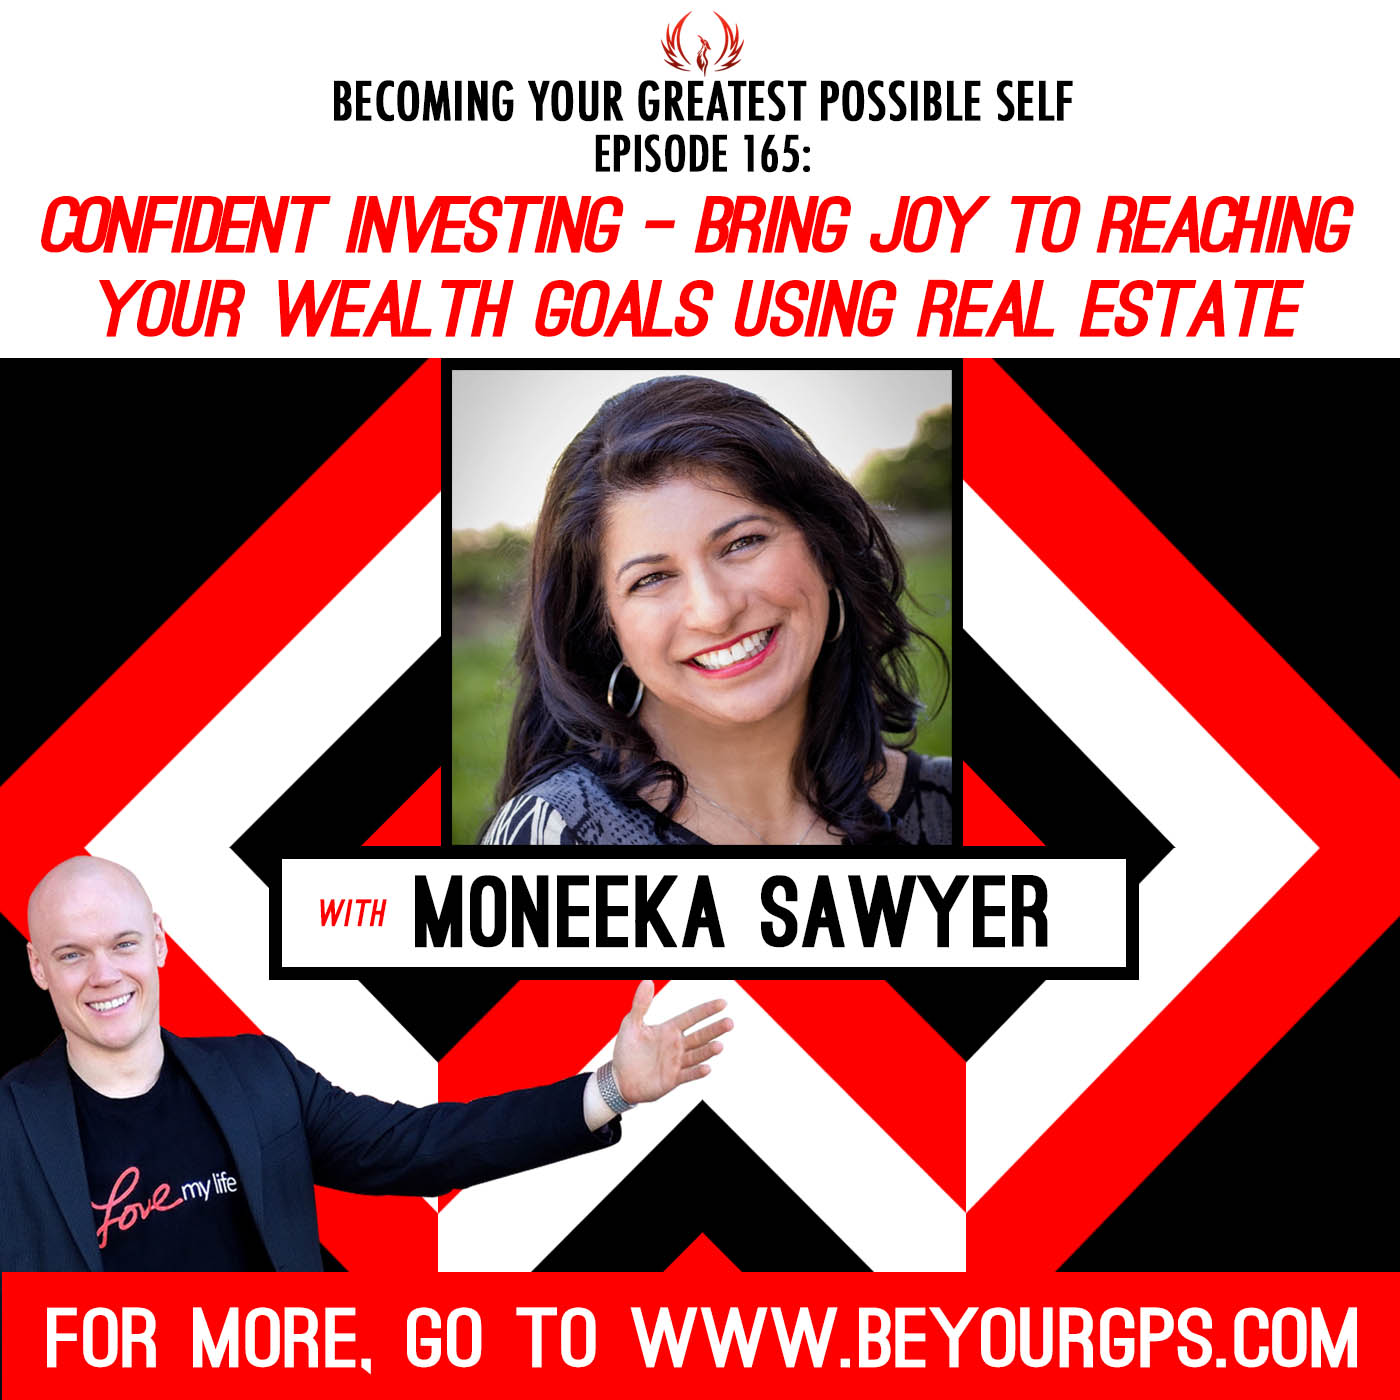 Confident Investing - Bring Joy to Reaching Your Wealth Goals Using Real Estate. with Moneeka Sawyer